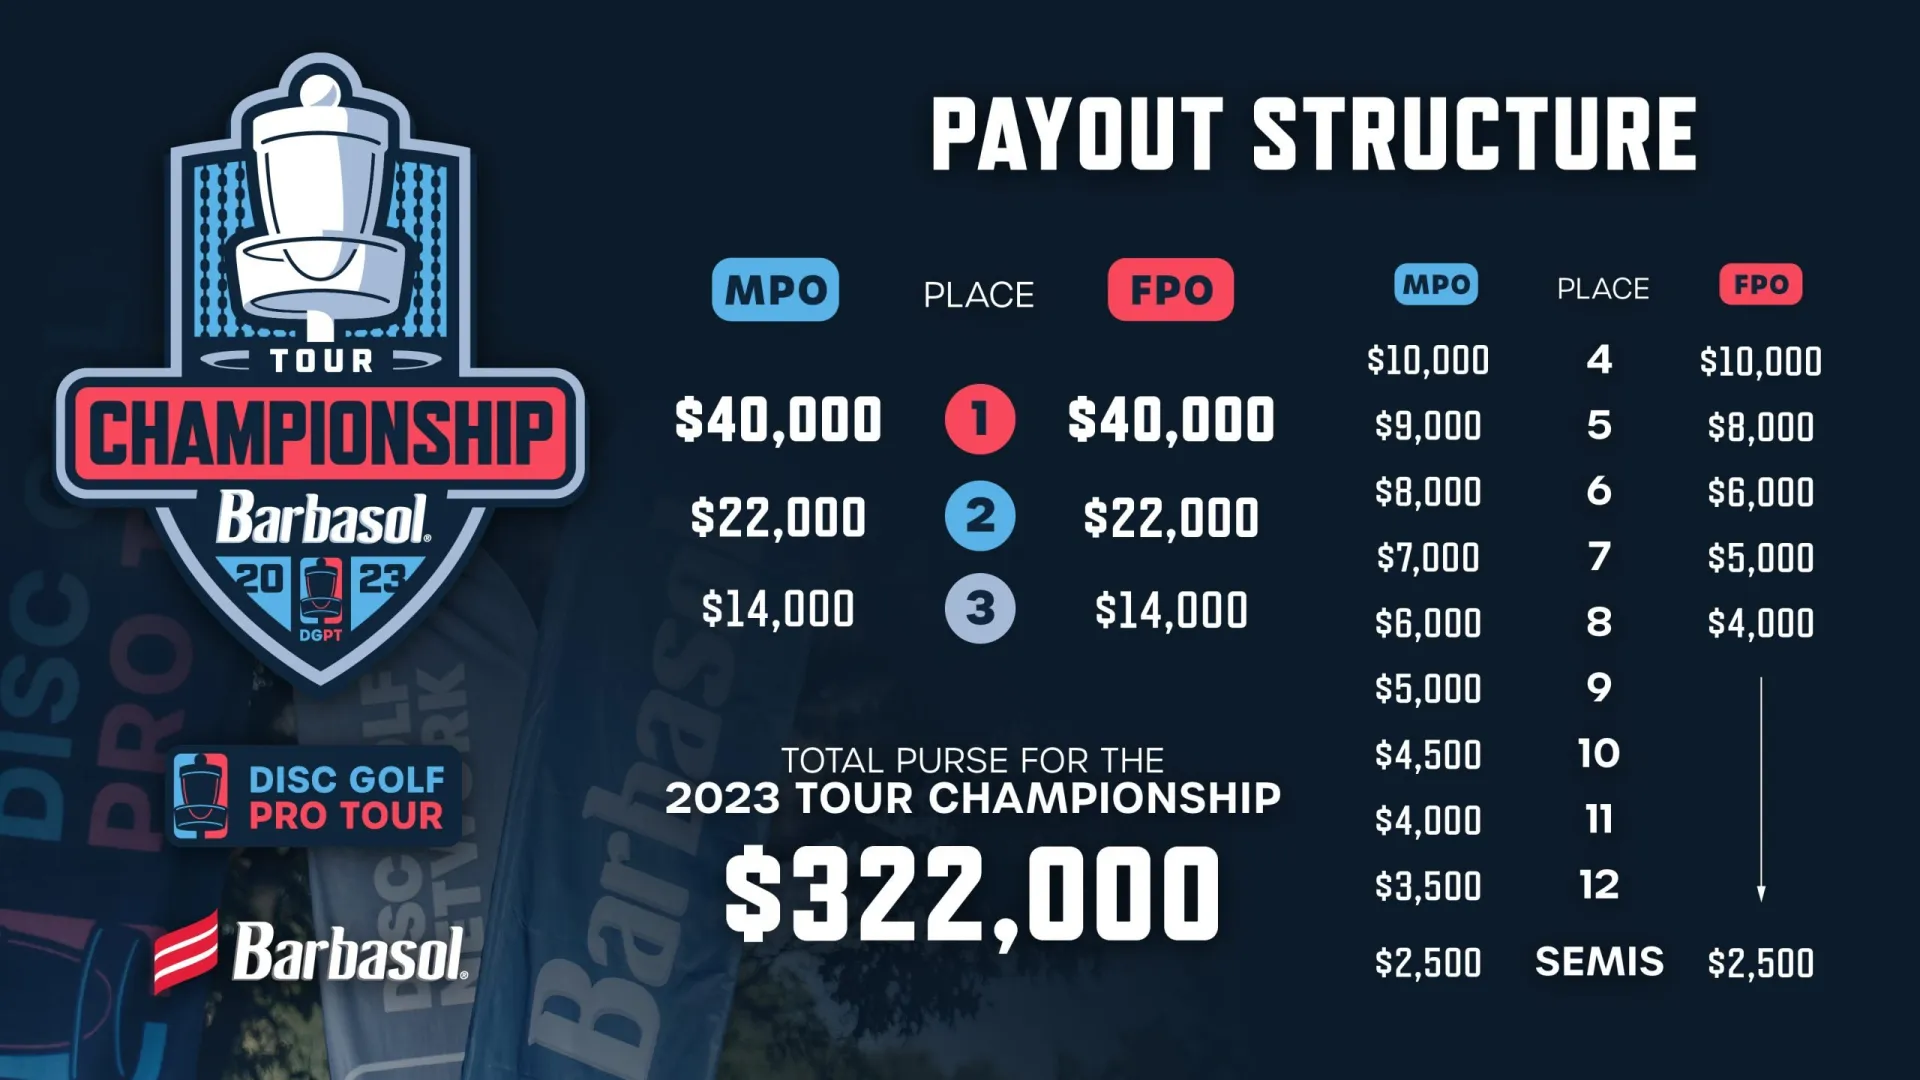 The PLAYERS Championship prize money payout in full - 2023